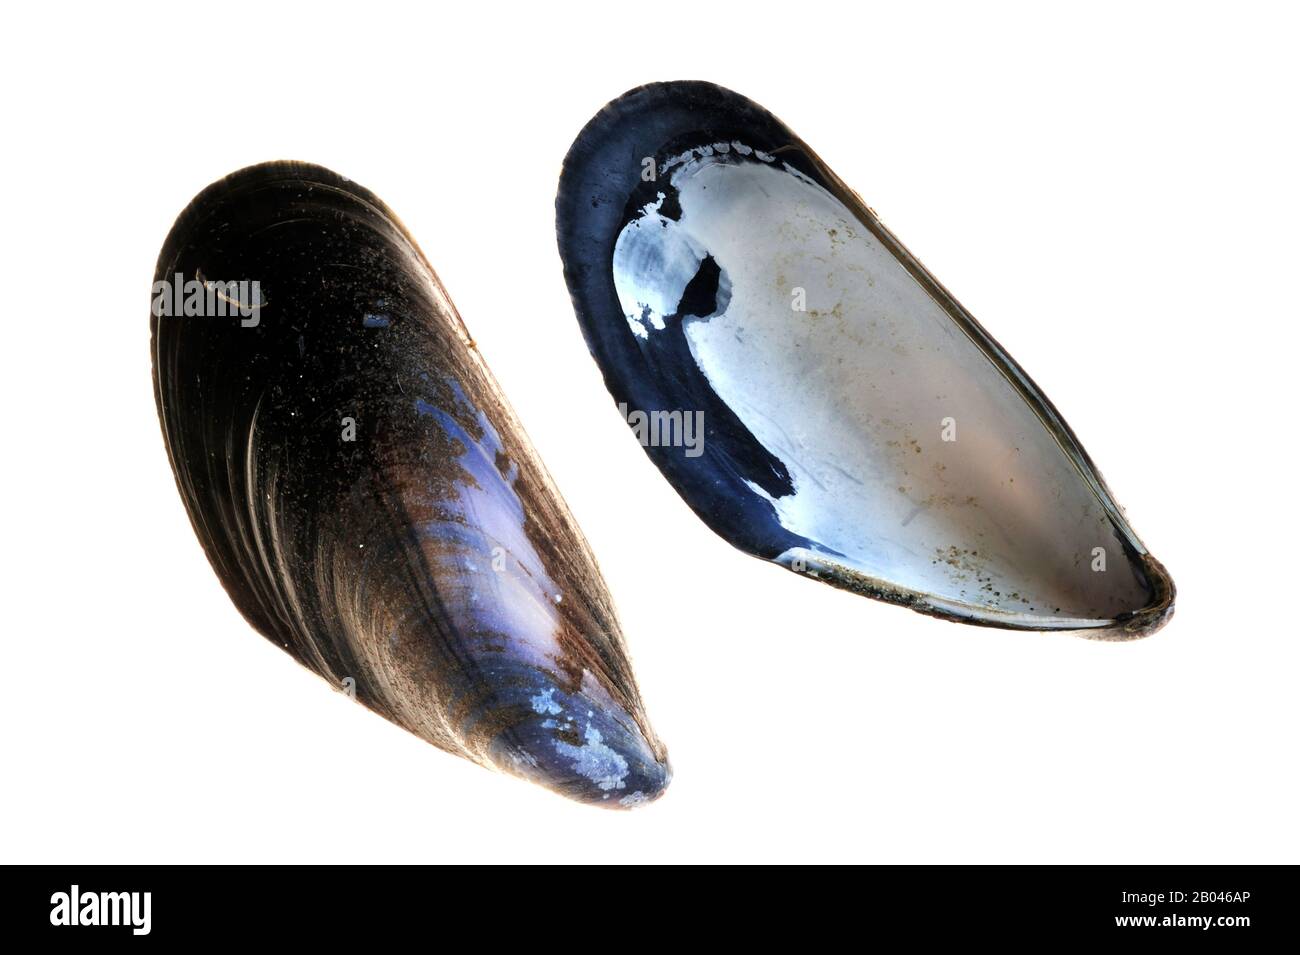 Two common mussel shells / blue mussels (Mytilus edulis) on white background Stock Photo